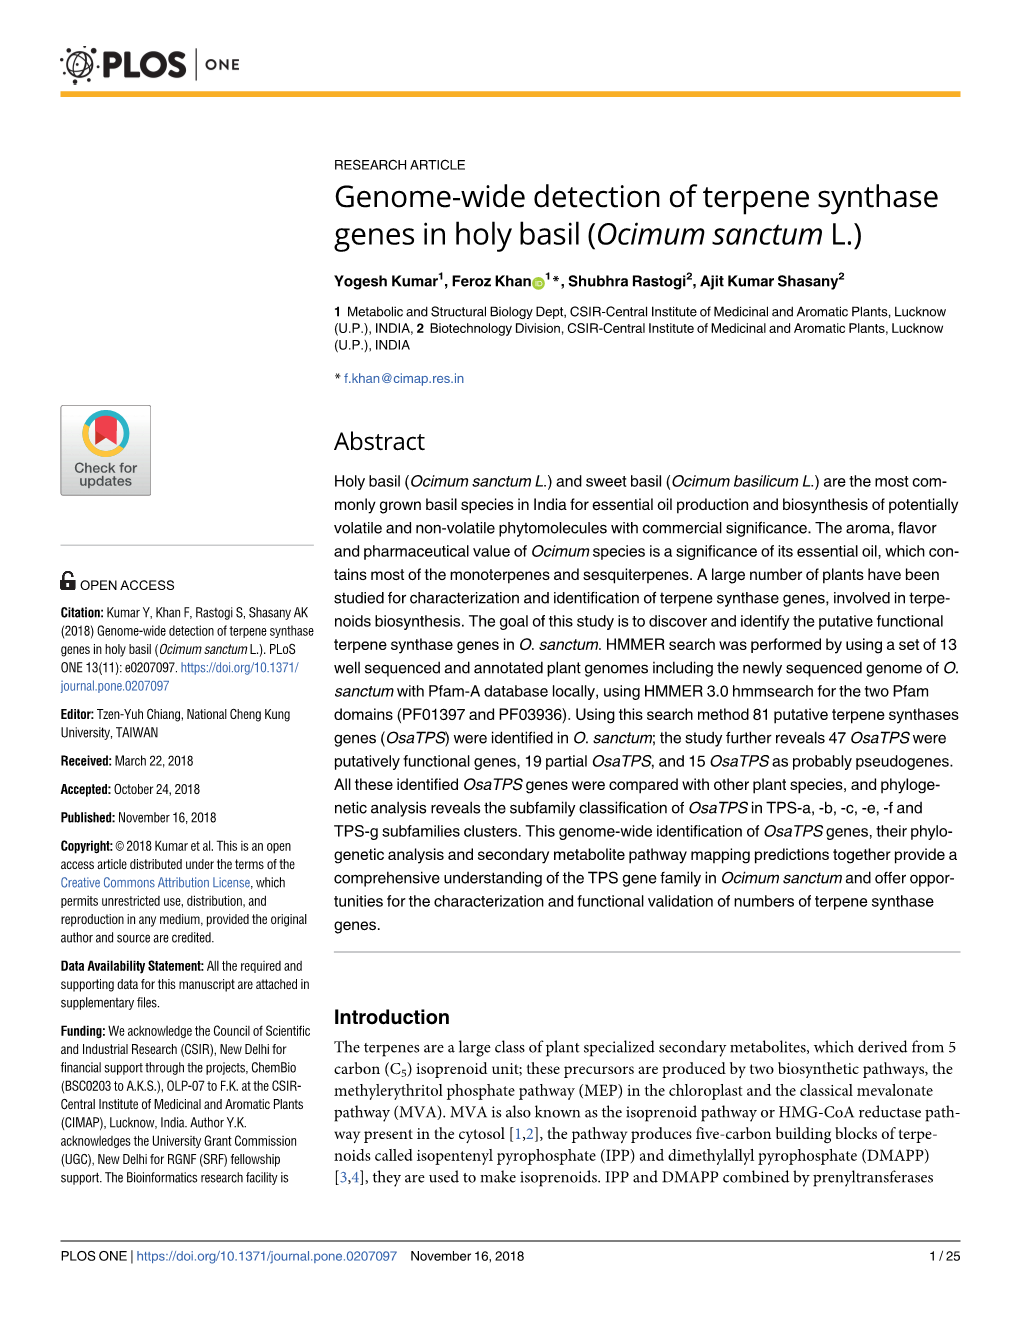 Genome-Wide Detection of Terpene Synthase Genes in Holy Basil (Ocimum Sanctum L.)